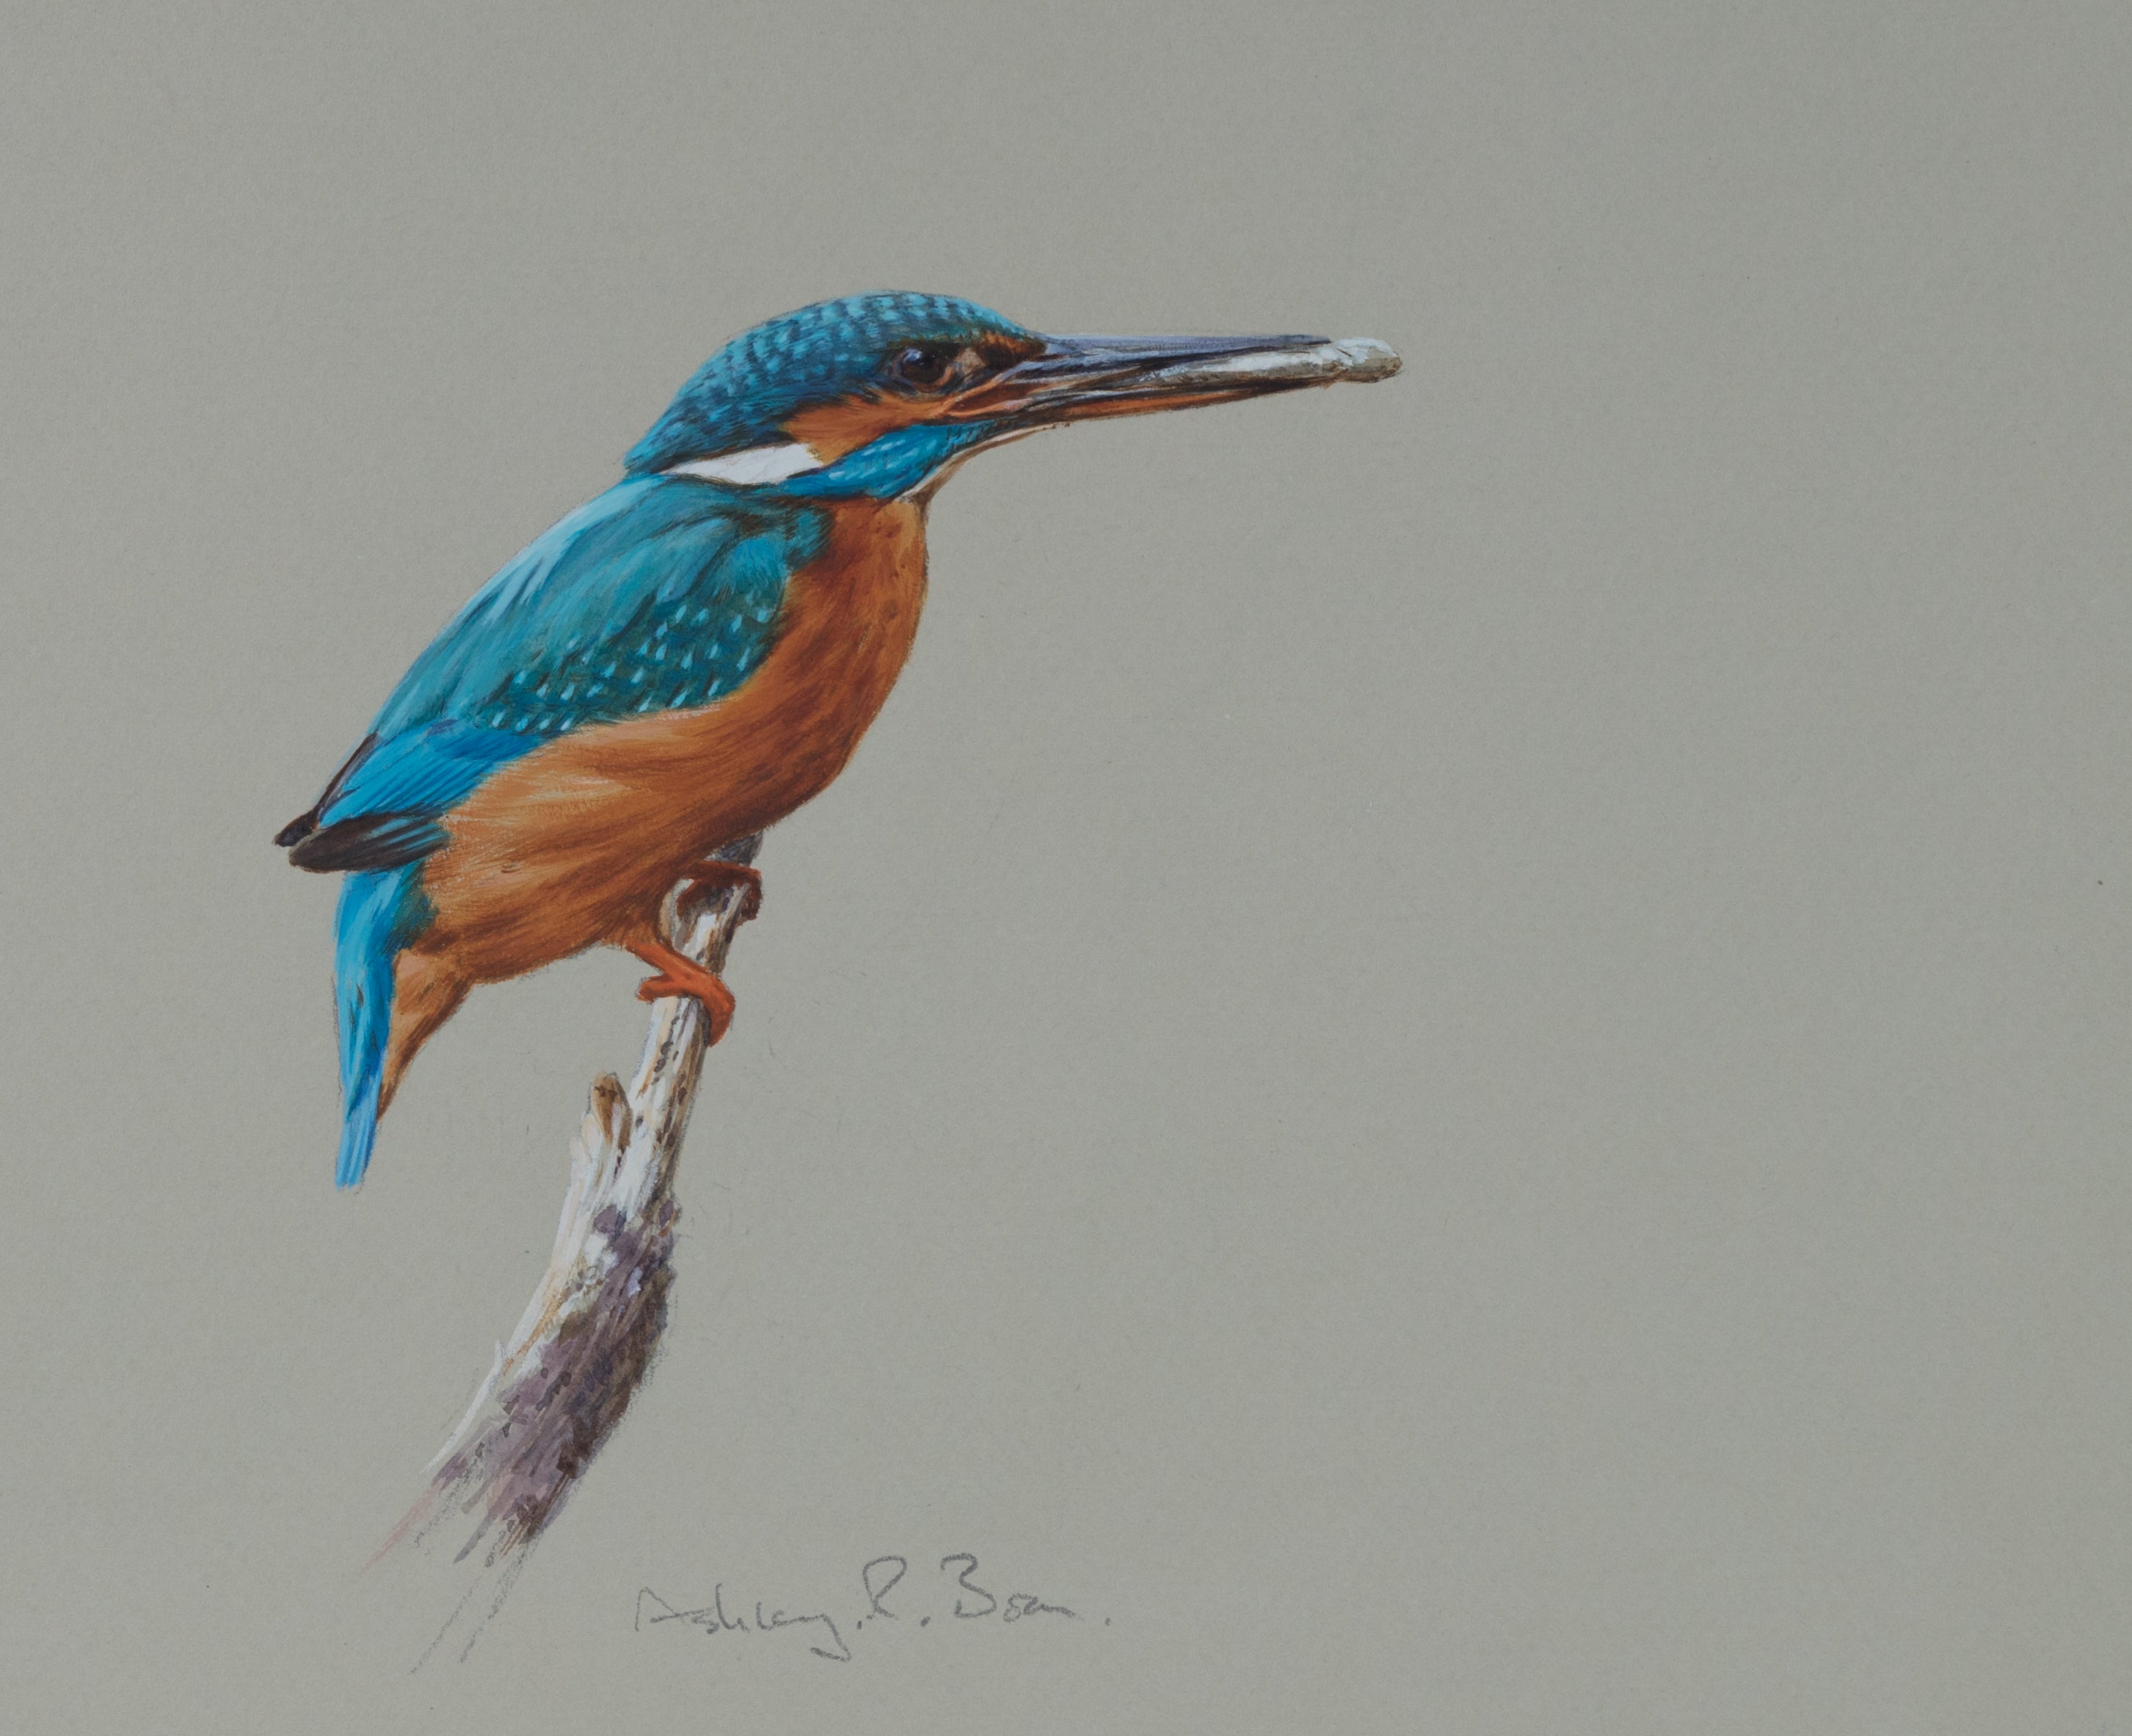 'Kingfisher with Fry' - Original watercolour by Ashley Boon - 7.5" x 8.5"